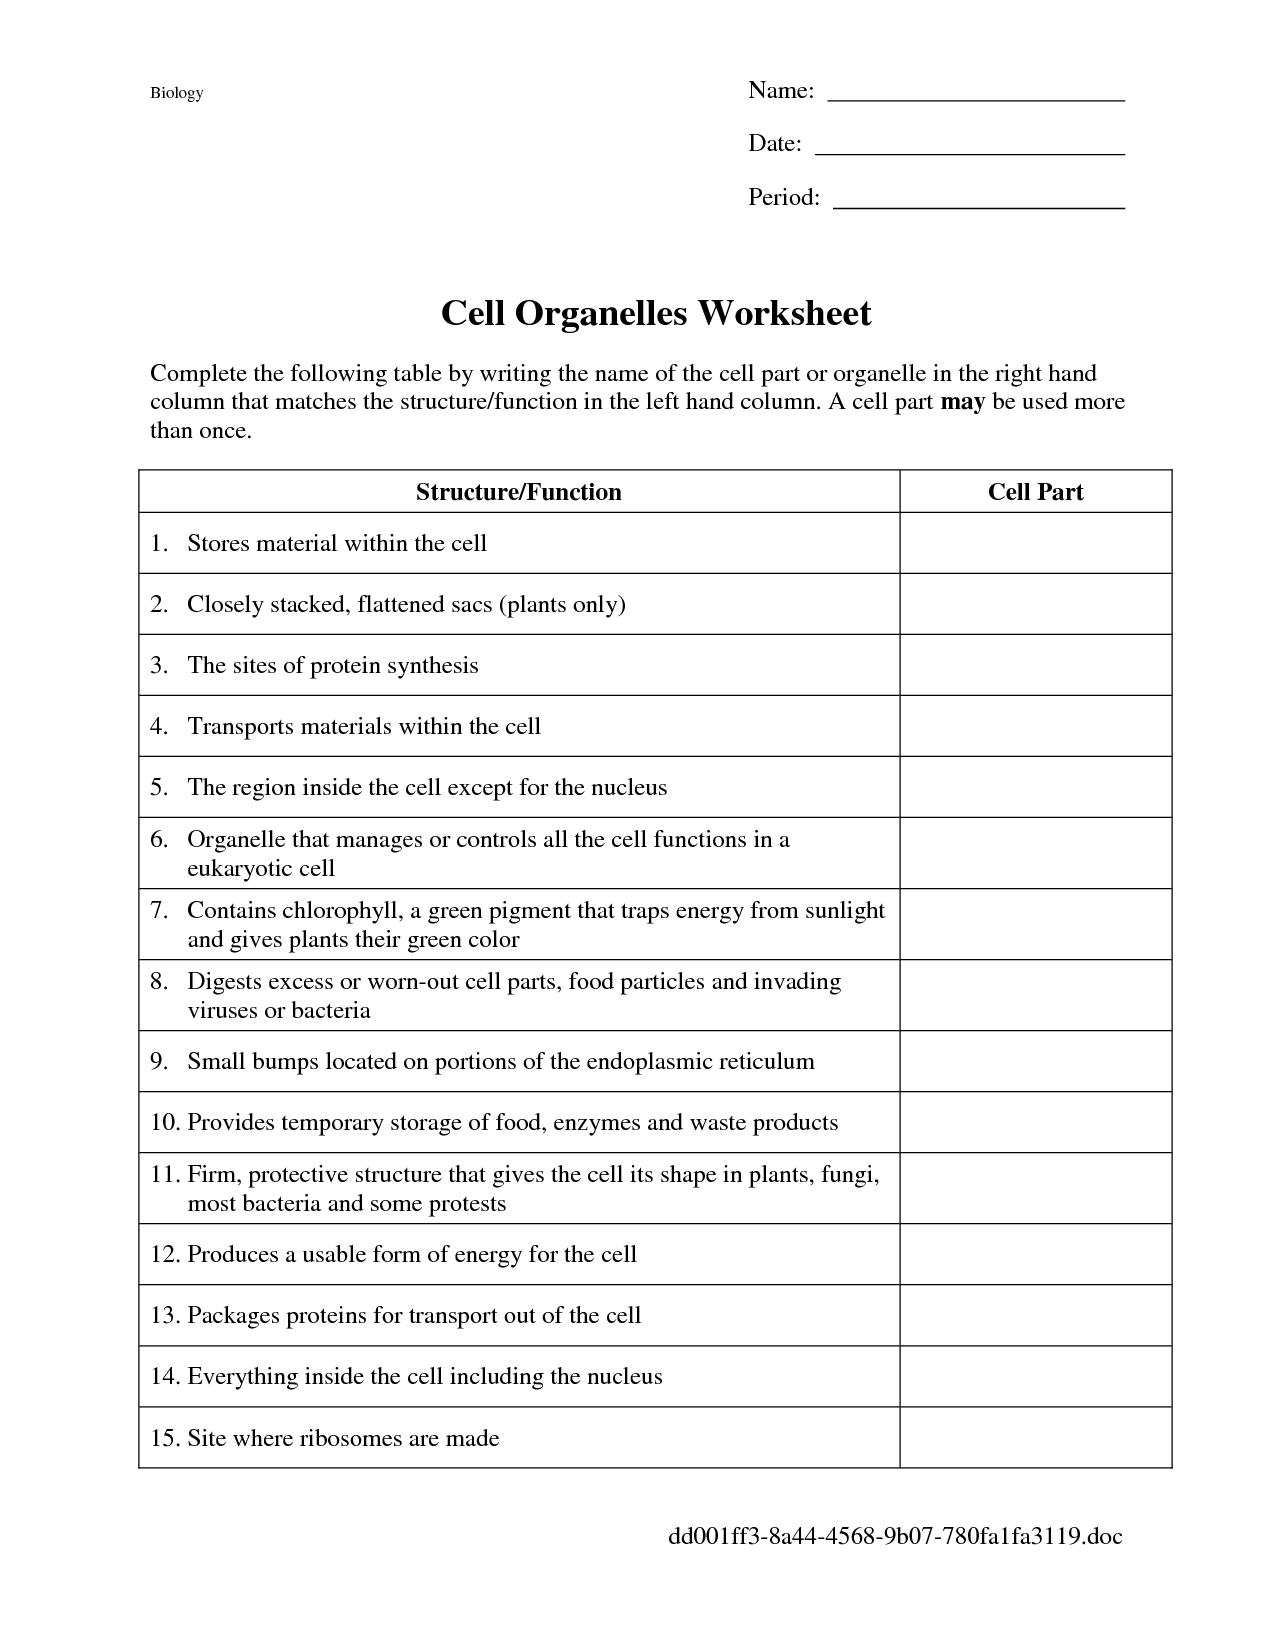 14 Best Images of Cell Structure And Function Worksheet Answers  Cell Organelles Worksheet 